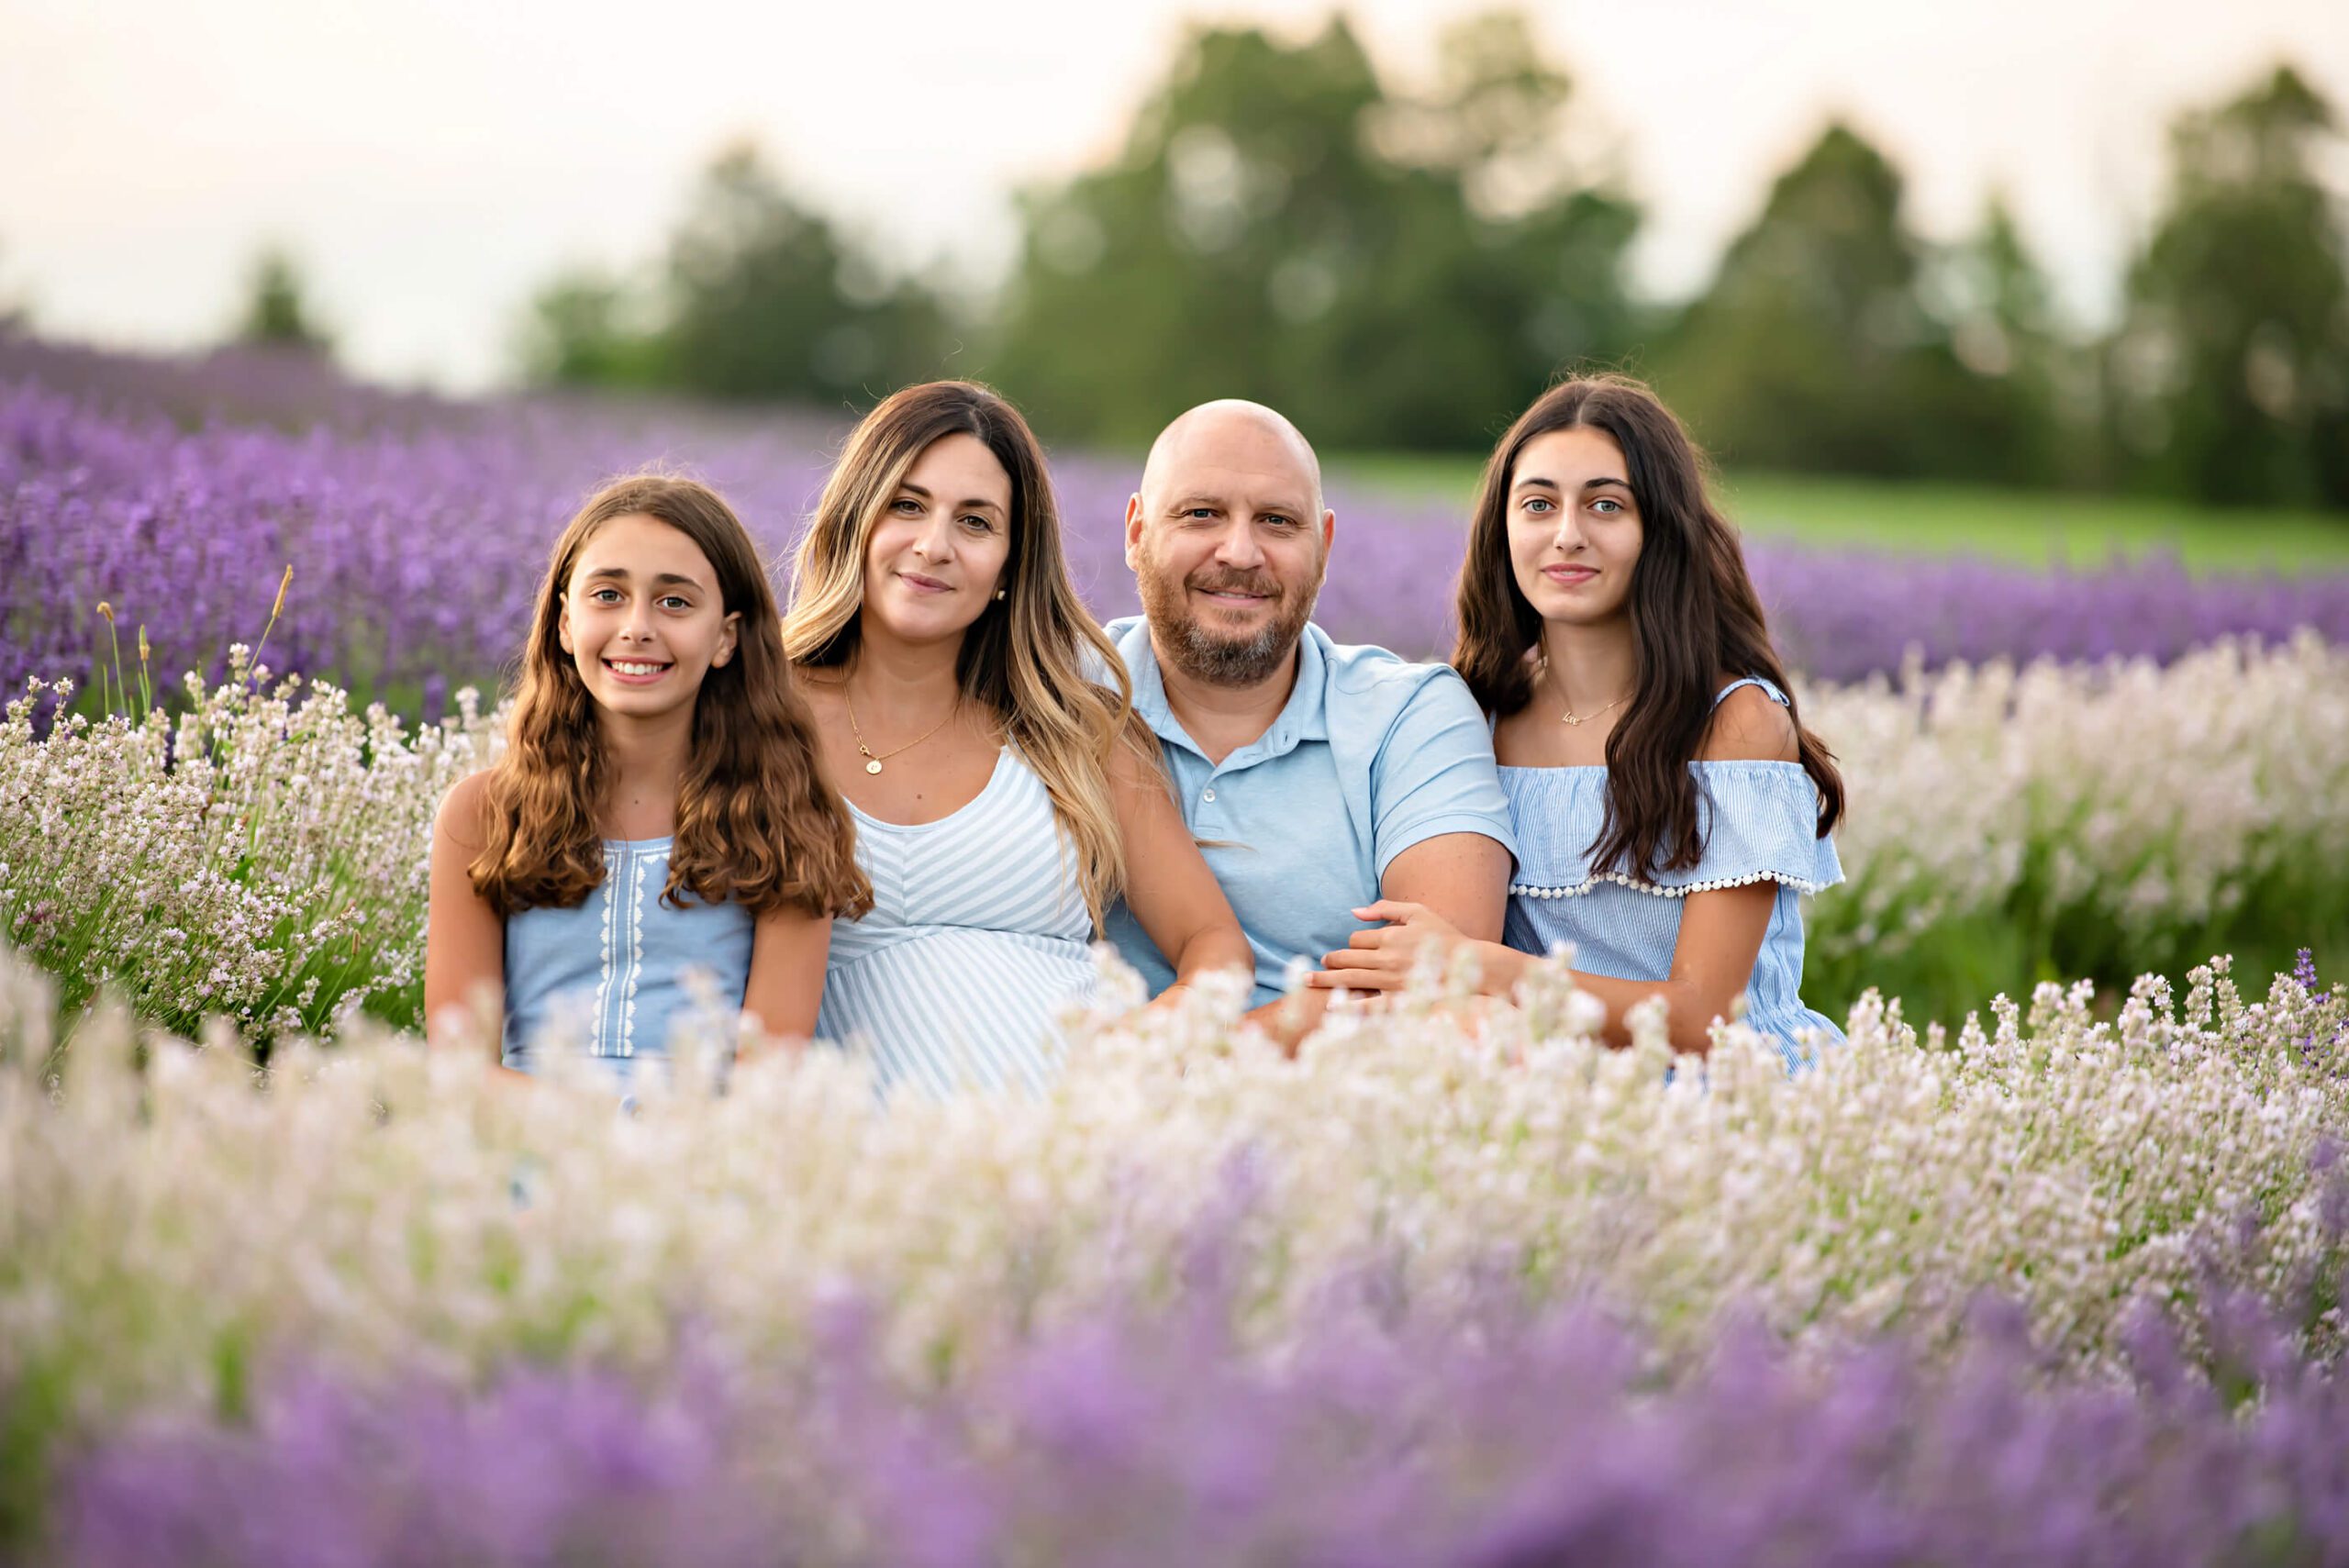 family photo at the lavender field maternity photography session